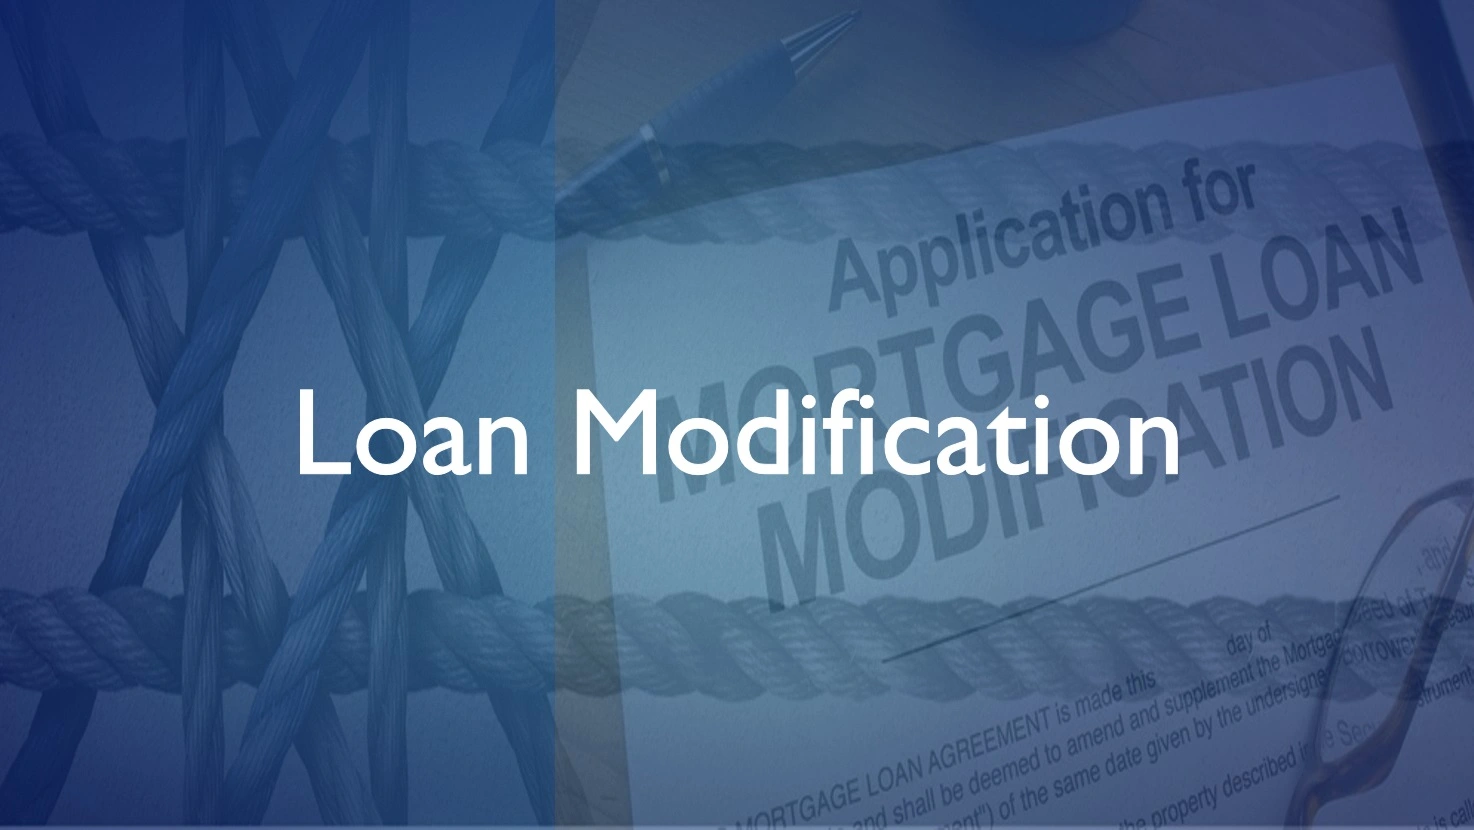 The words Loan Modification with blue background showing an application